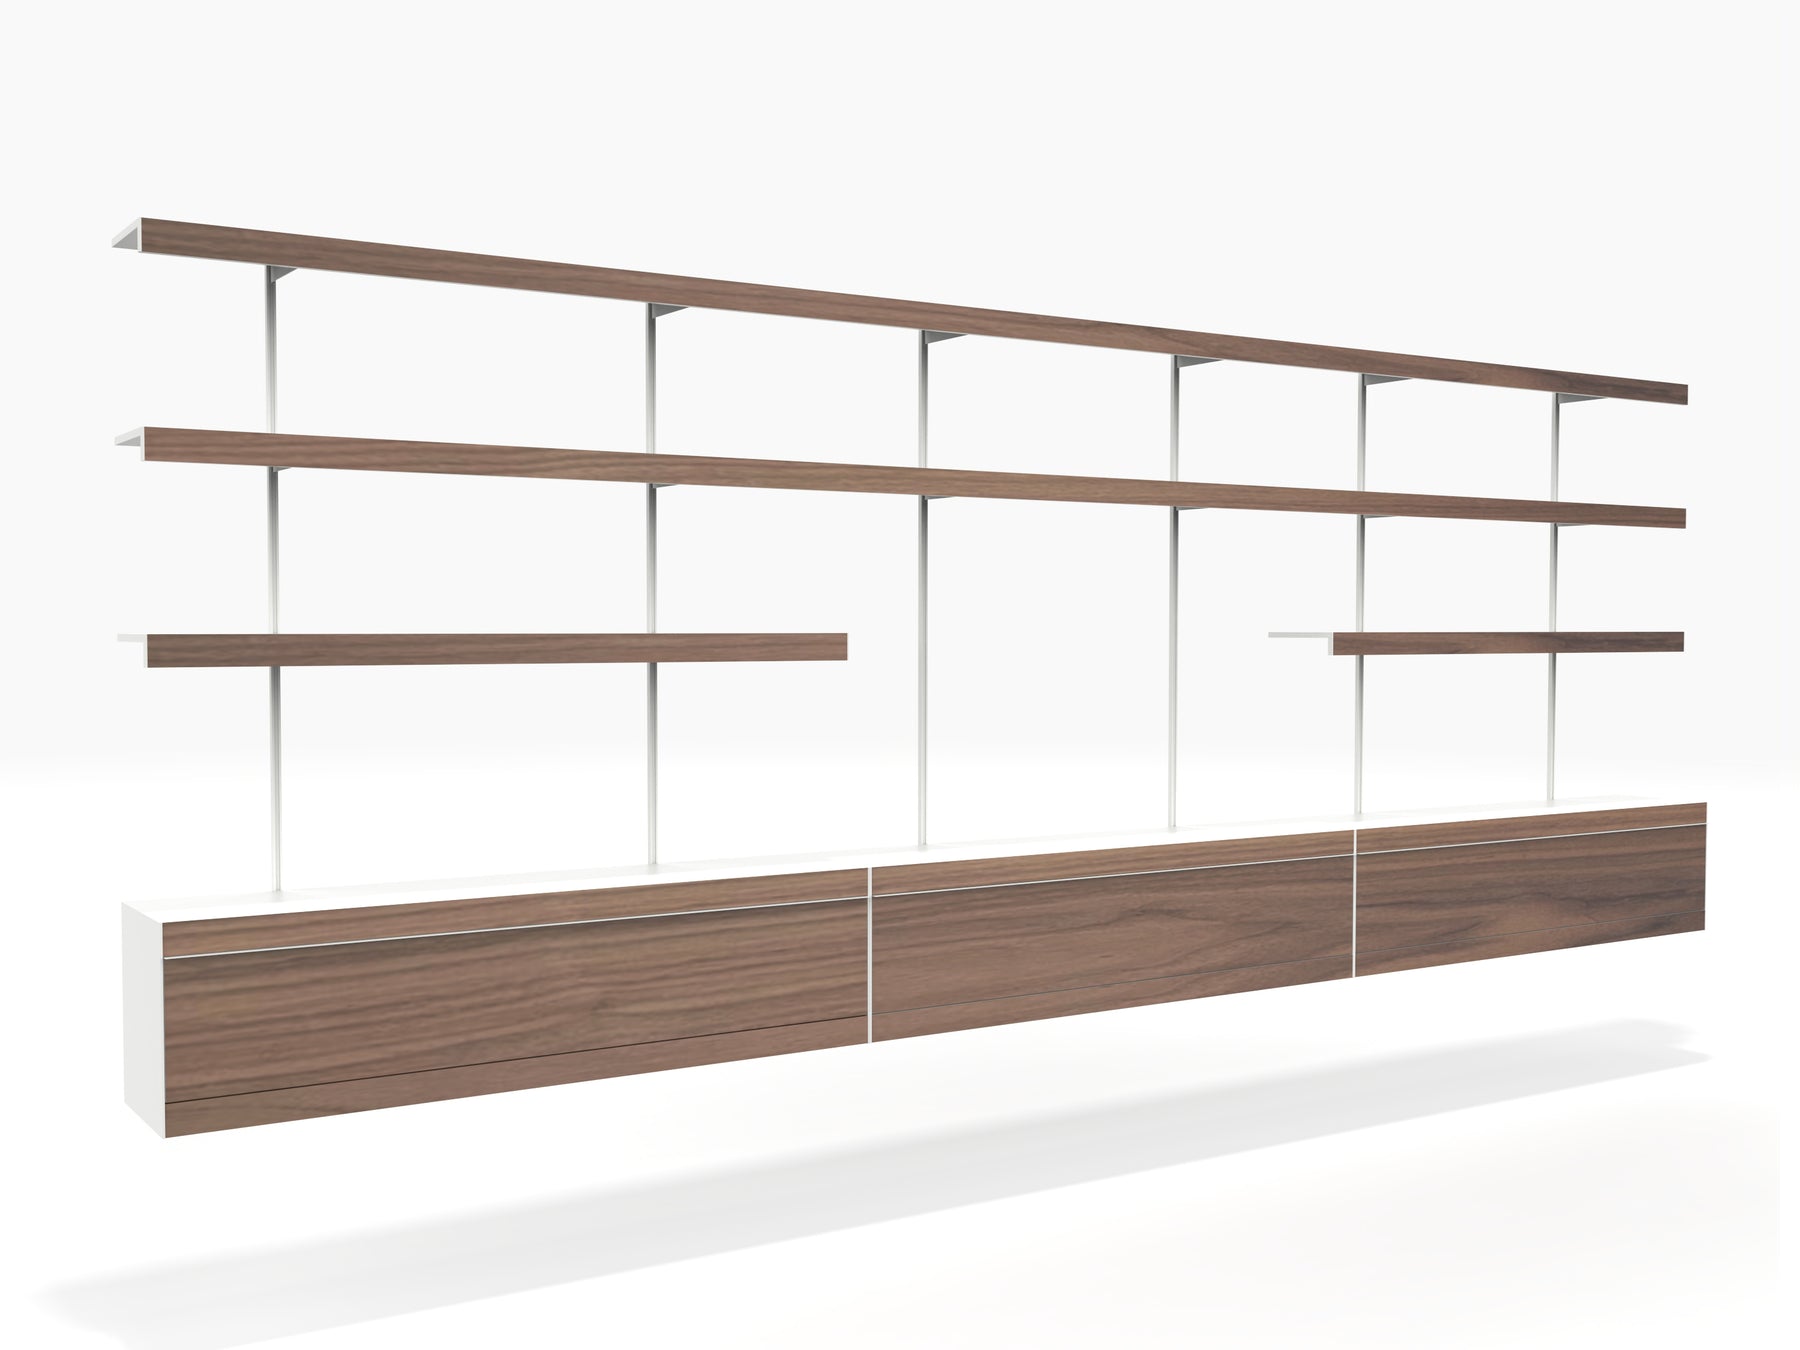 TV shelving wall with wall cabinets in white and walnut